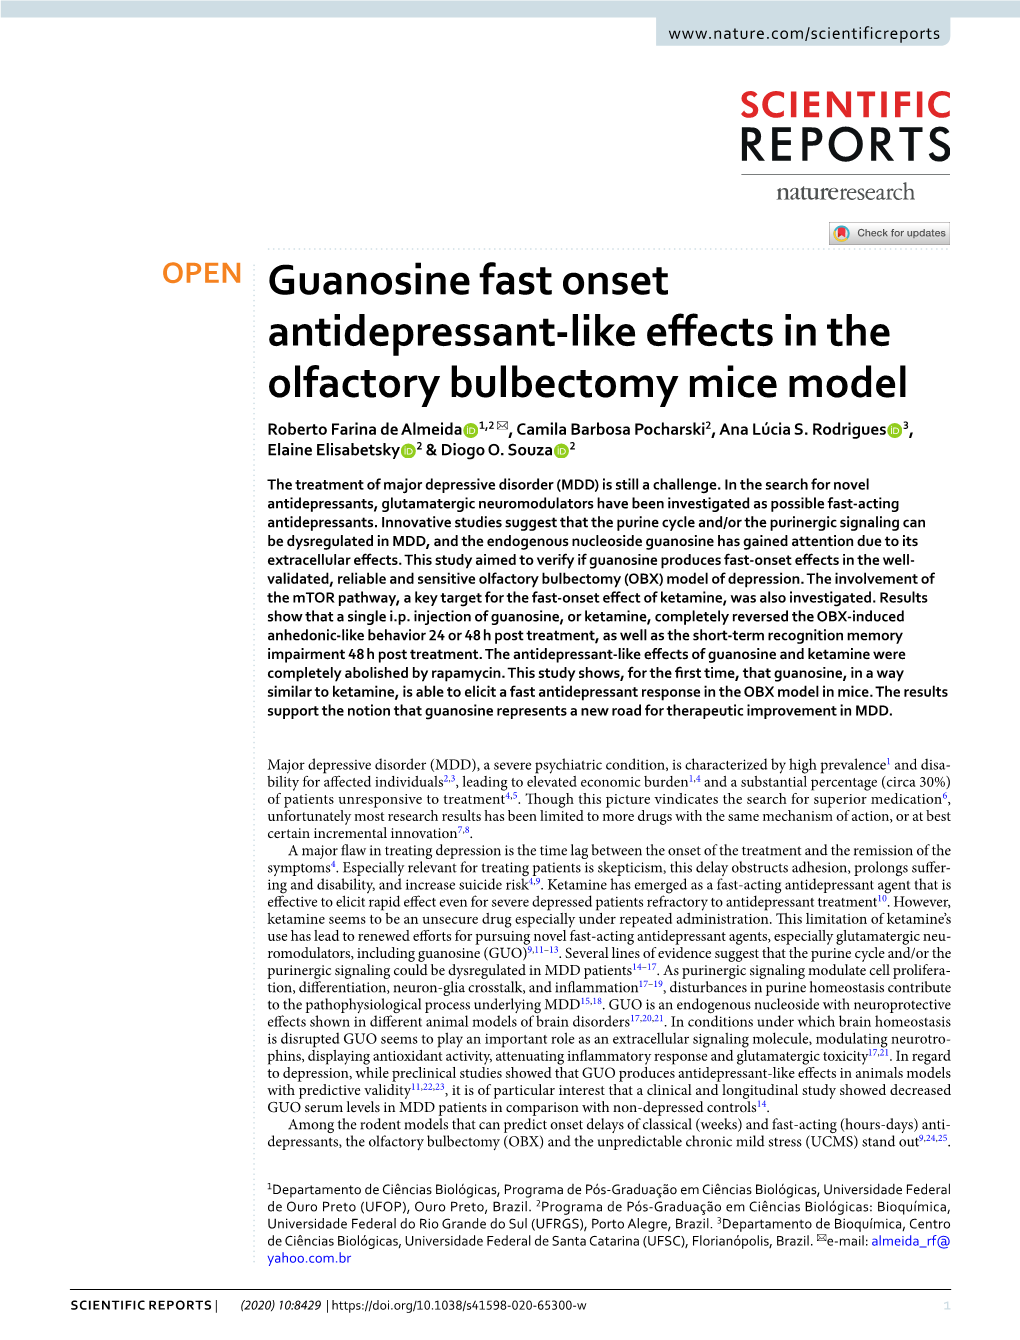 Guanosine Fast Onset Antidepressant-Like Effects in The